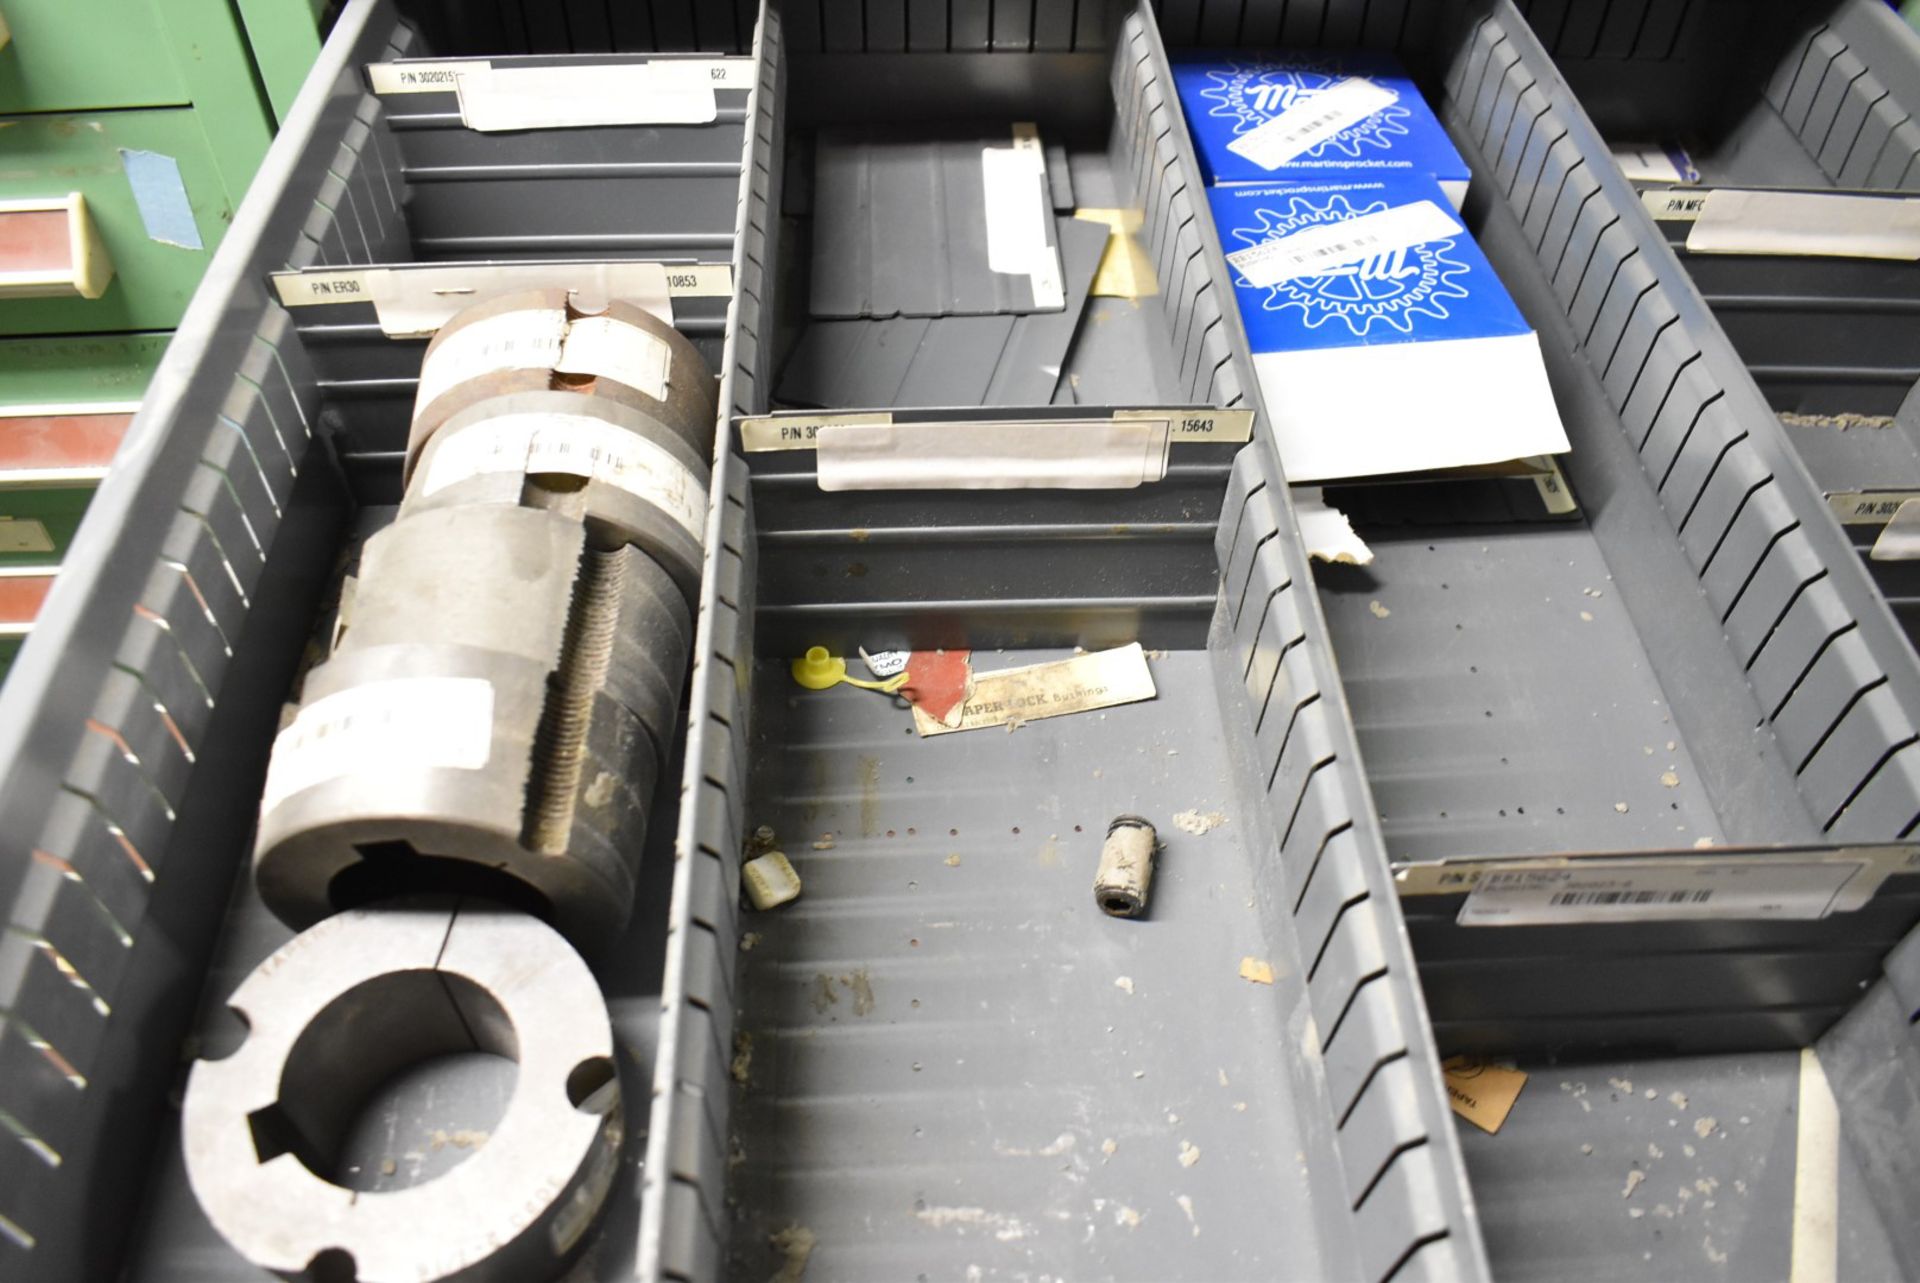 LOT/ CONTENTS OF CABINET - INCLUDING BUSHINGS, SPARE PARTS (TOOL CABINET NOT INCLUDED) [RIGGING FEES - Image 4 of 6